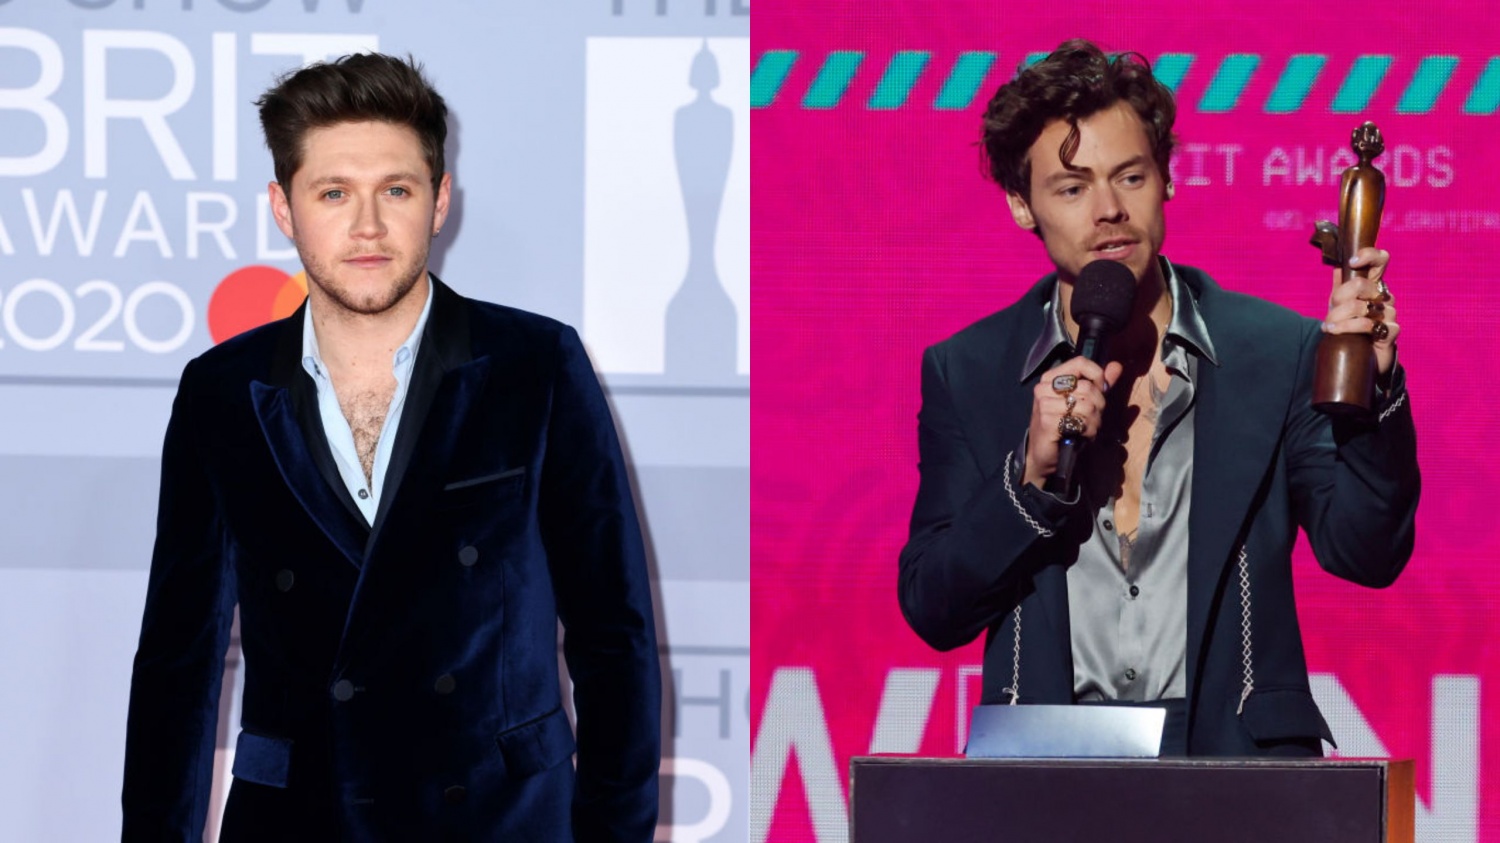 Niall Horan, Harry Styles New Song Coming Soon?: One Direction Fans Speculate on Collab! [WATCH]